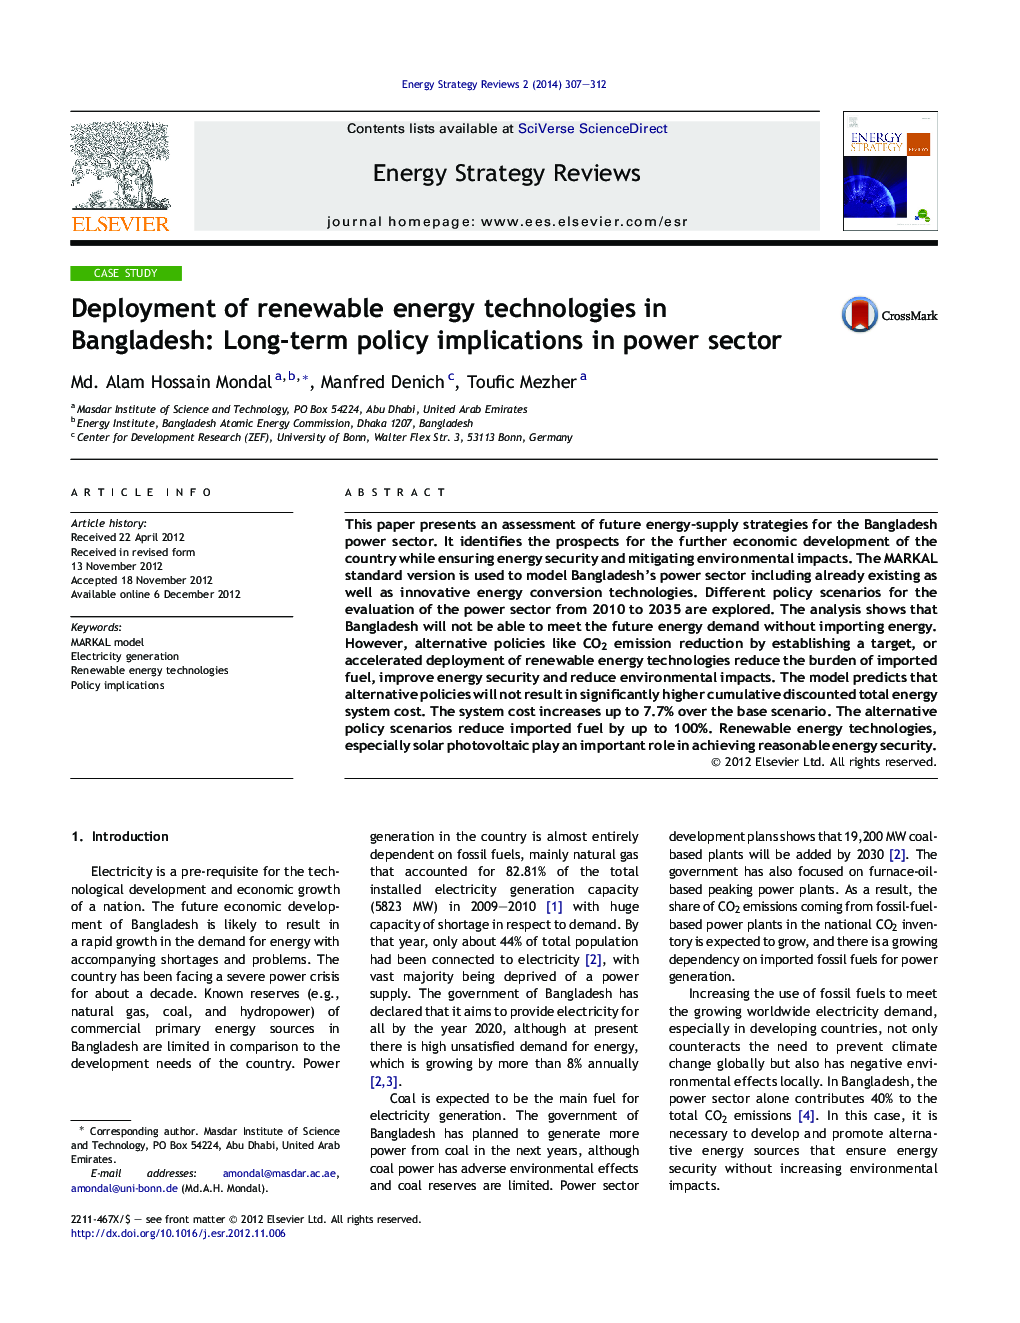 Deployment of renewable energy technologies in Bangladesh: Long-term policy implications in power sector